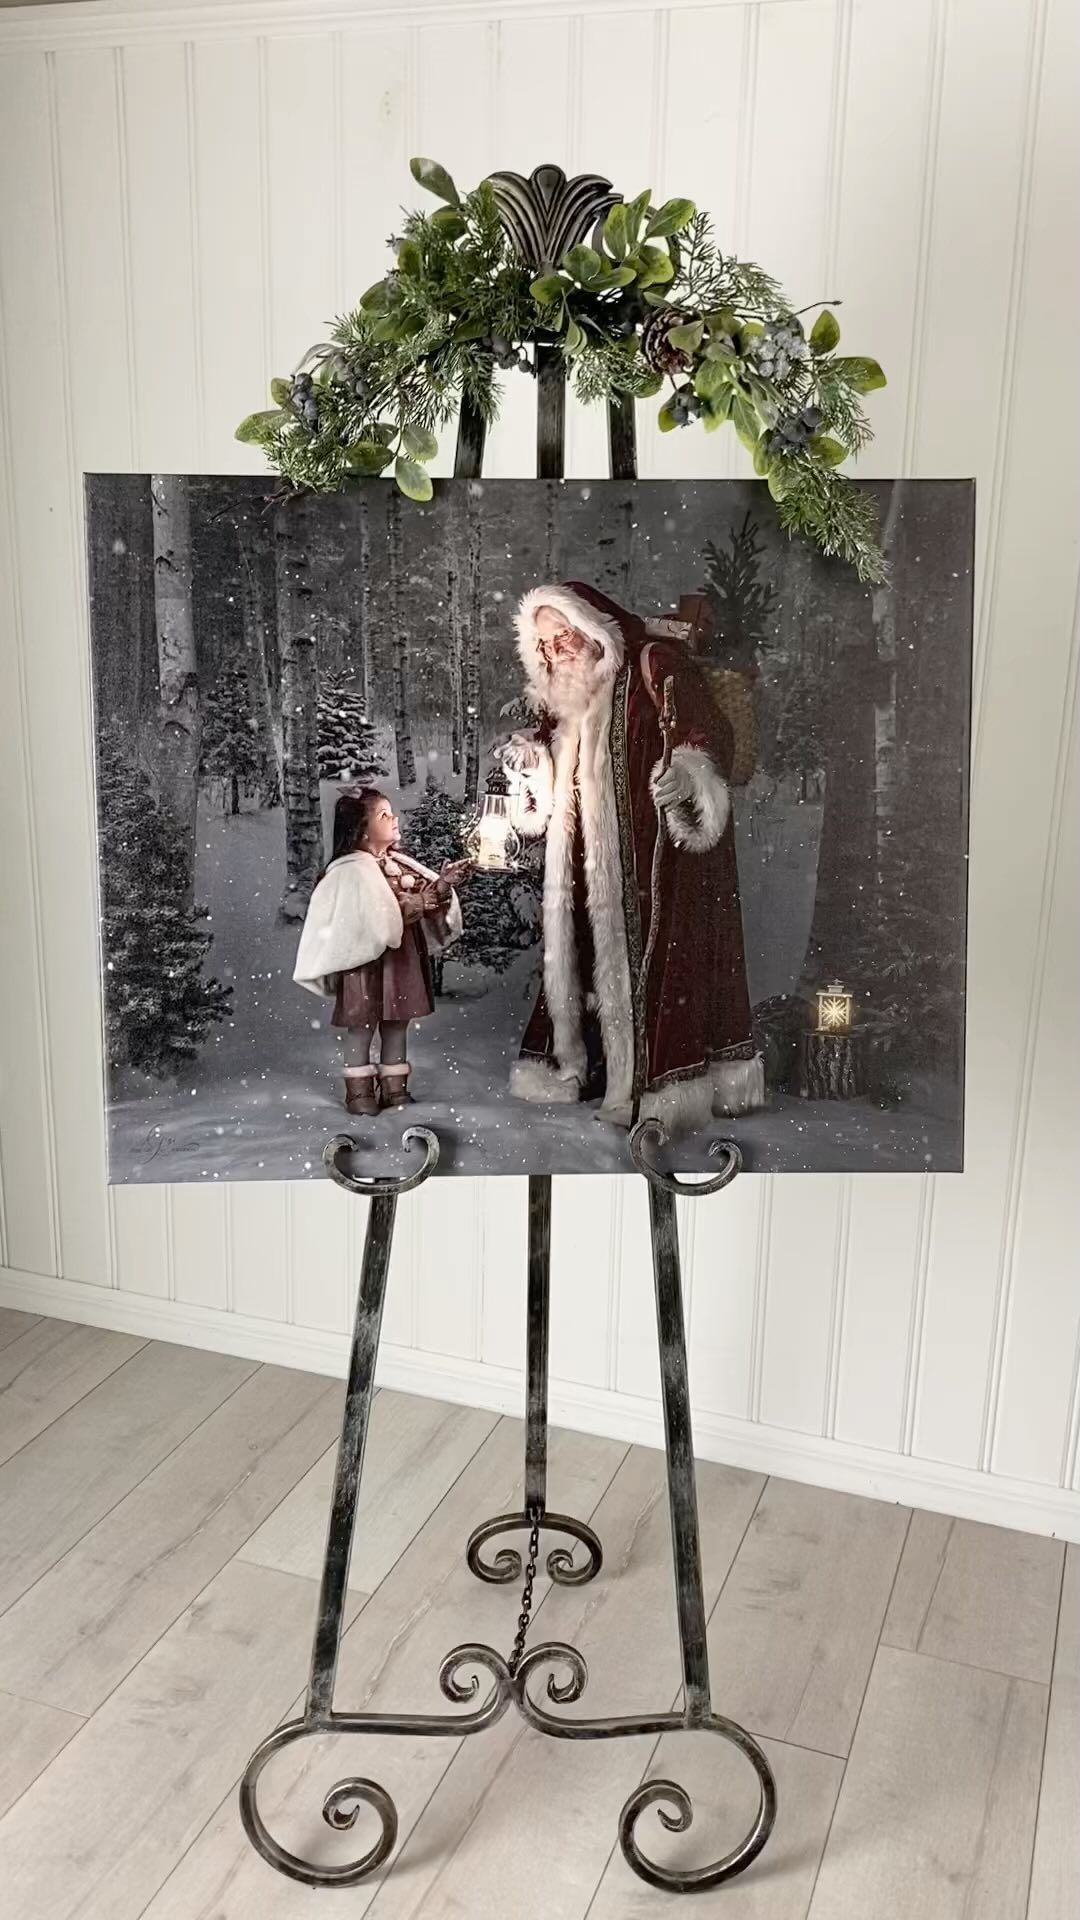 Invest in the art of FAMILY and cherish those magical Christmas moments of childhood for years to come. Wall Art is a great way to add a personal touch to your home when decorating for the holidays. We offer a variety of sizes and framing options which makes it easy to customize for each of our client’s needs. Too hard to choose just one image? We also offer a Wall Art Trio collection! 

Learn more about our Fine Art Santa sessions on the website! Link in bio